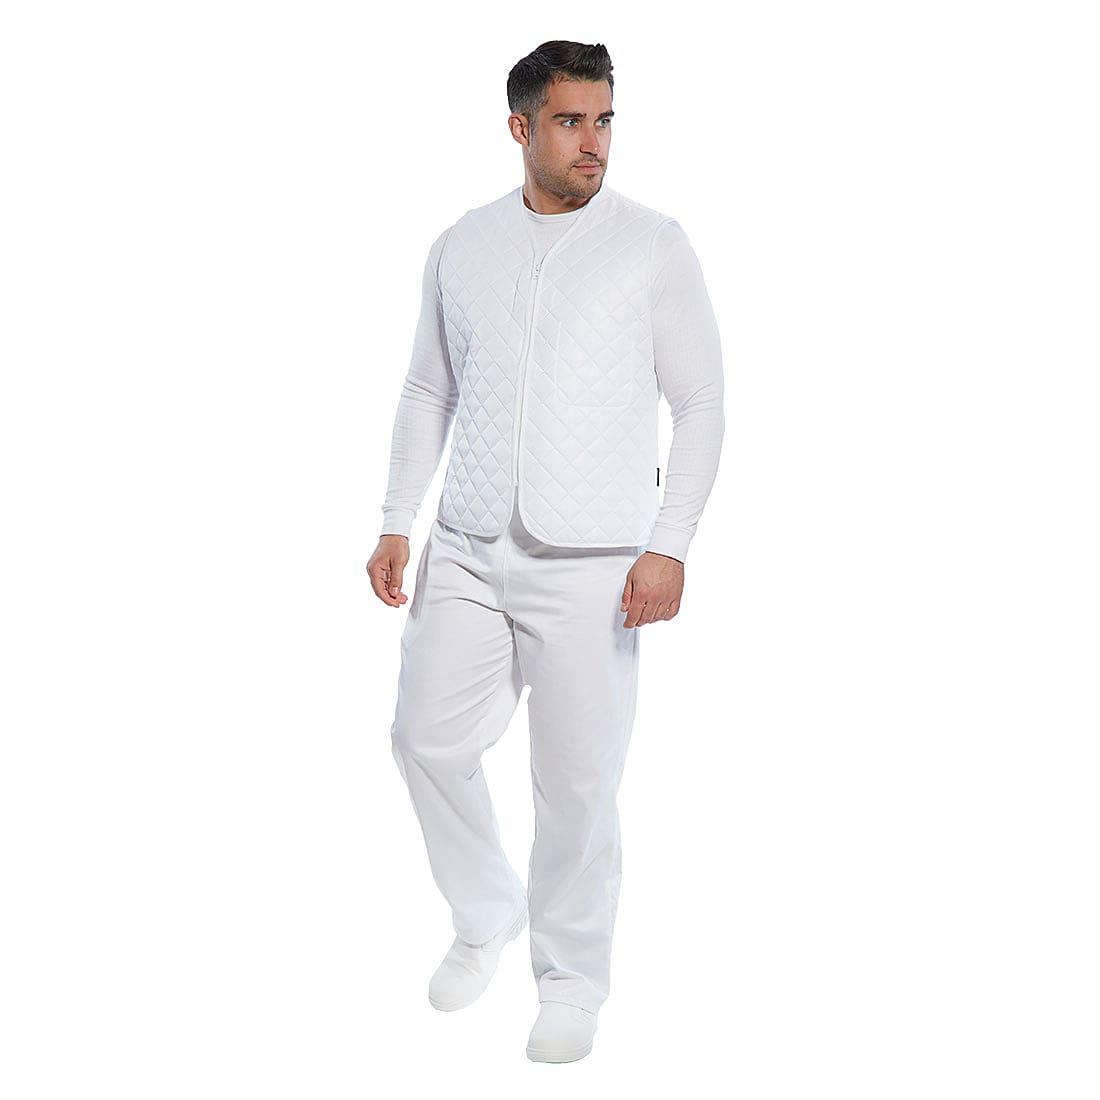 Portwest Food Industry Bodywarmer in White (Product Code: 2204)